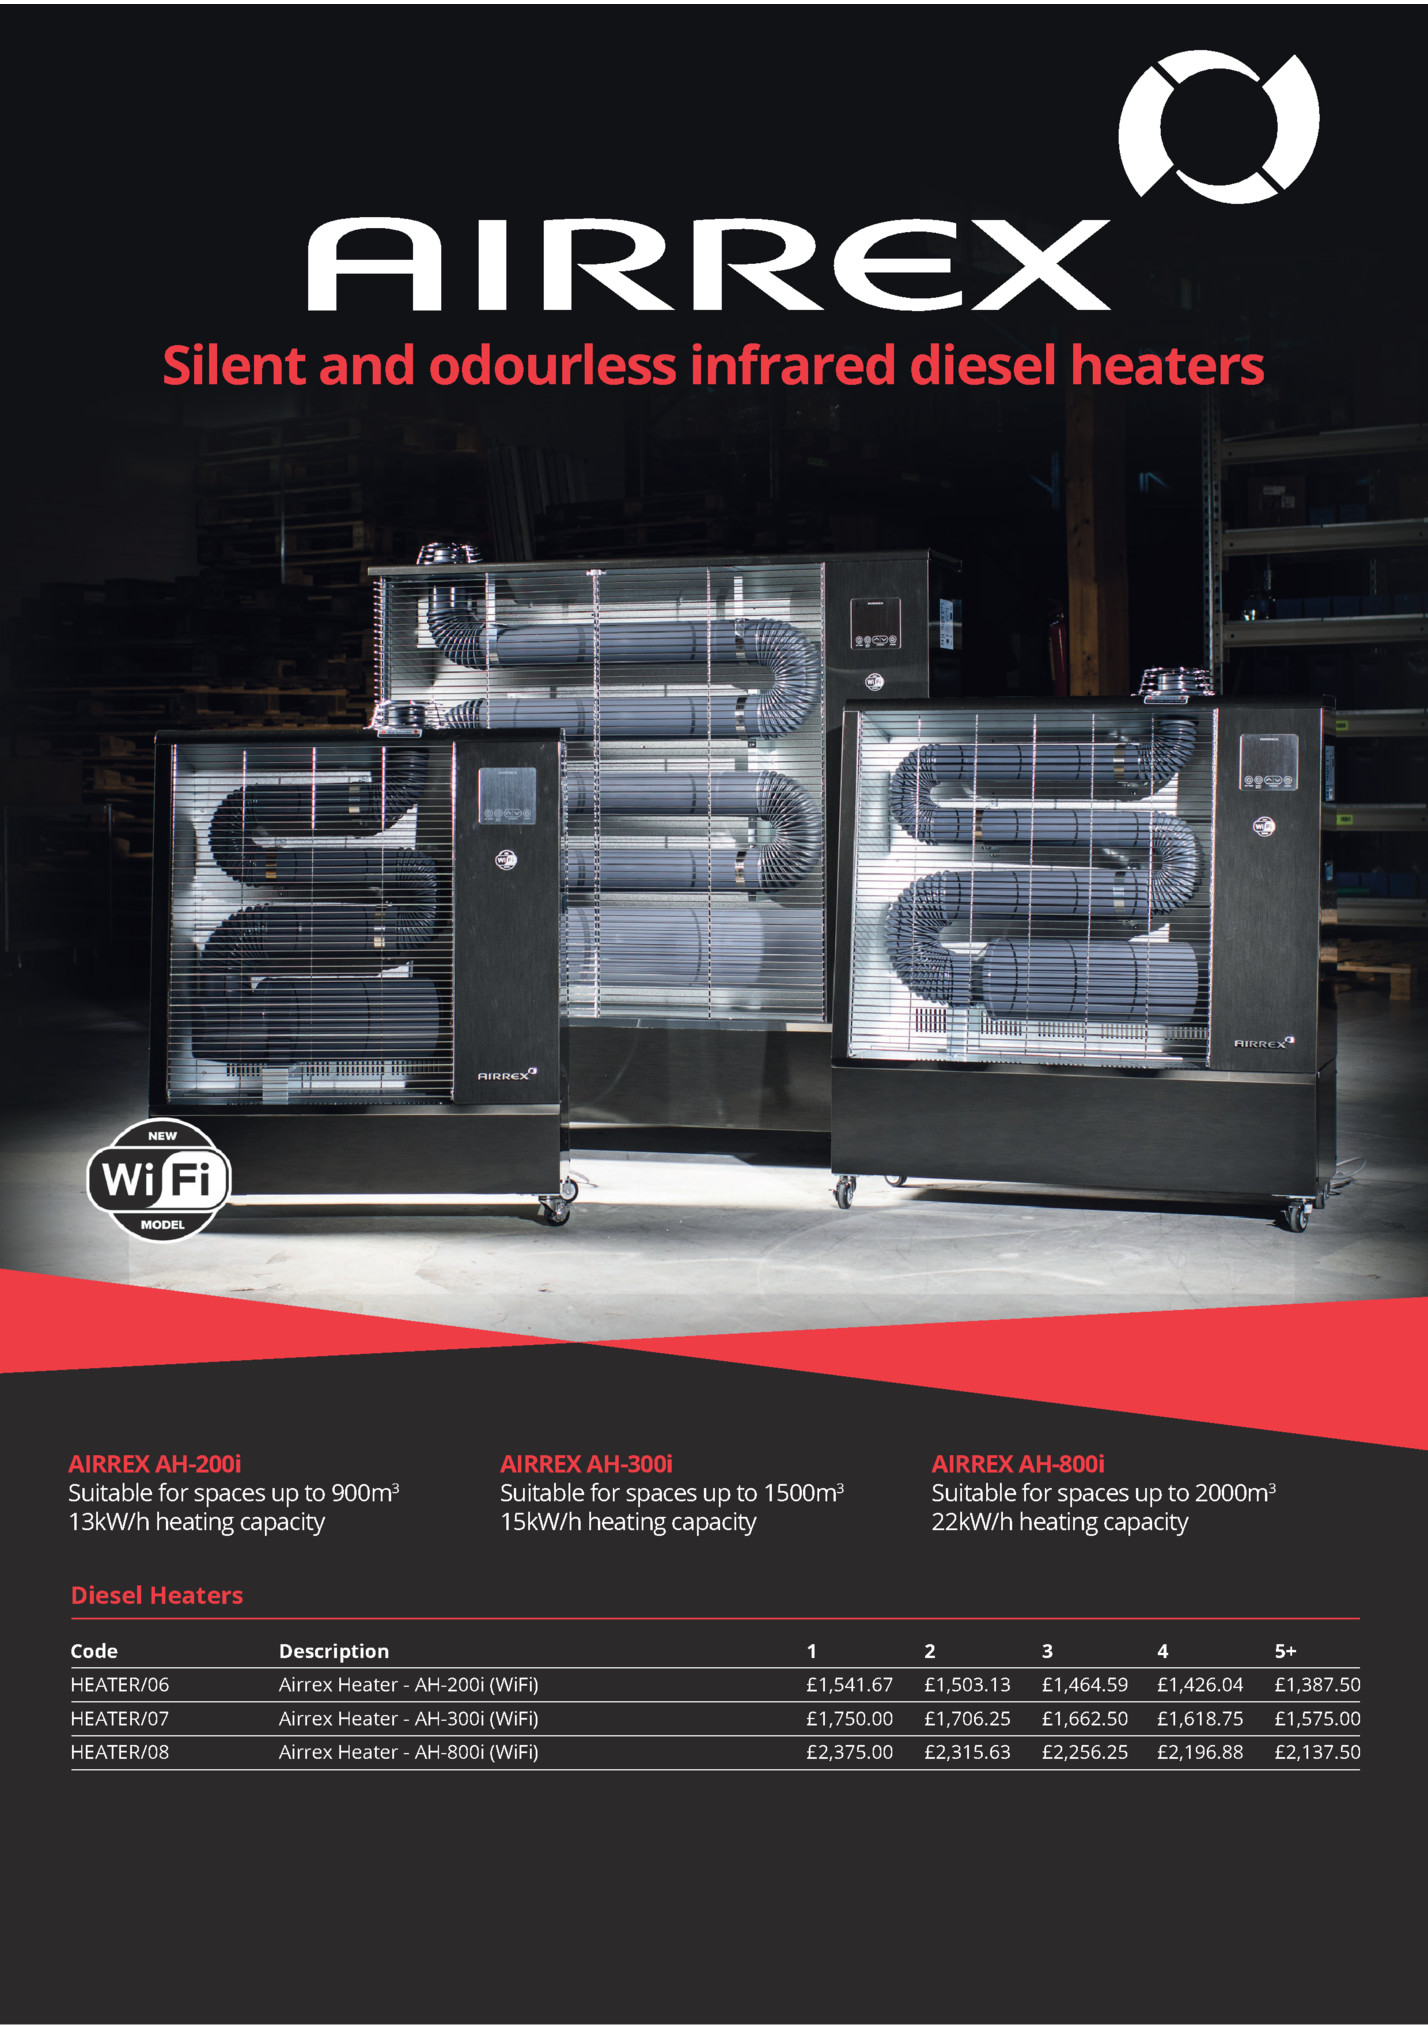 Silent and odourless infrared diesel heaters